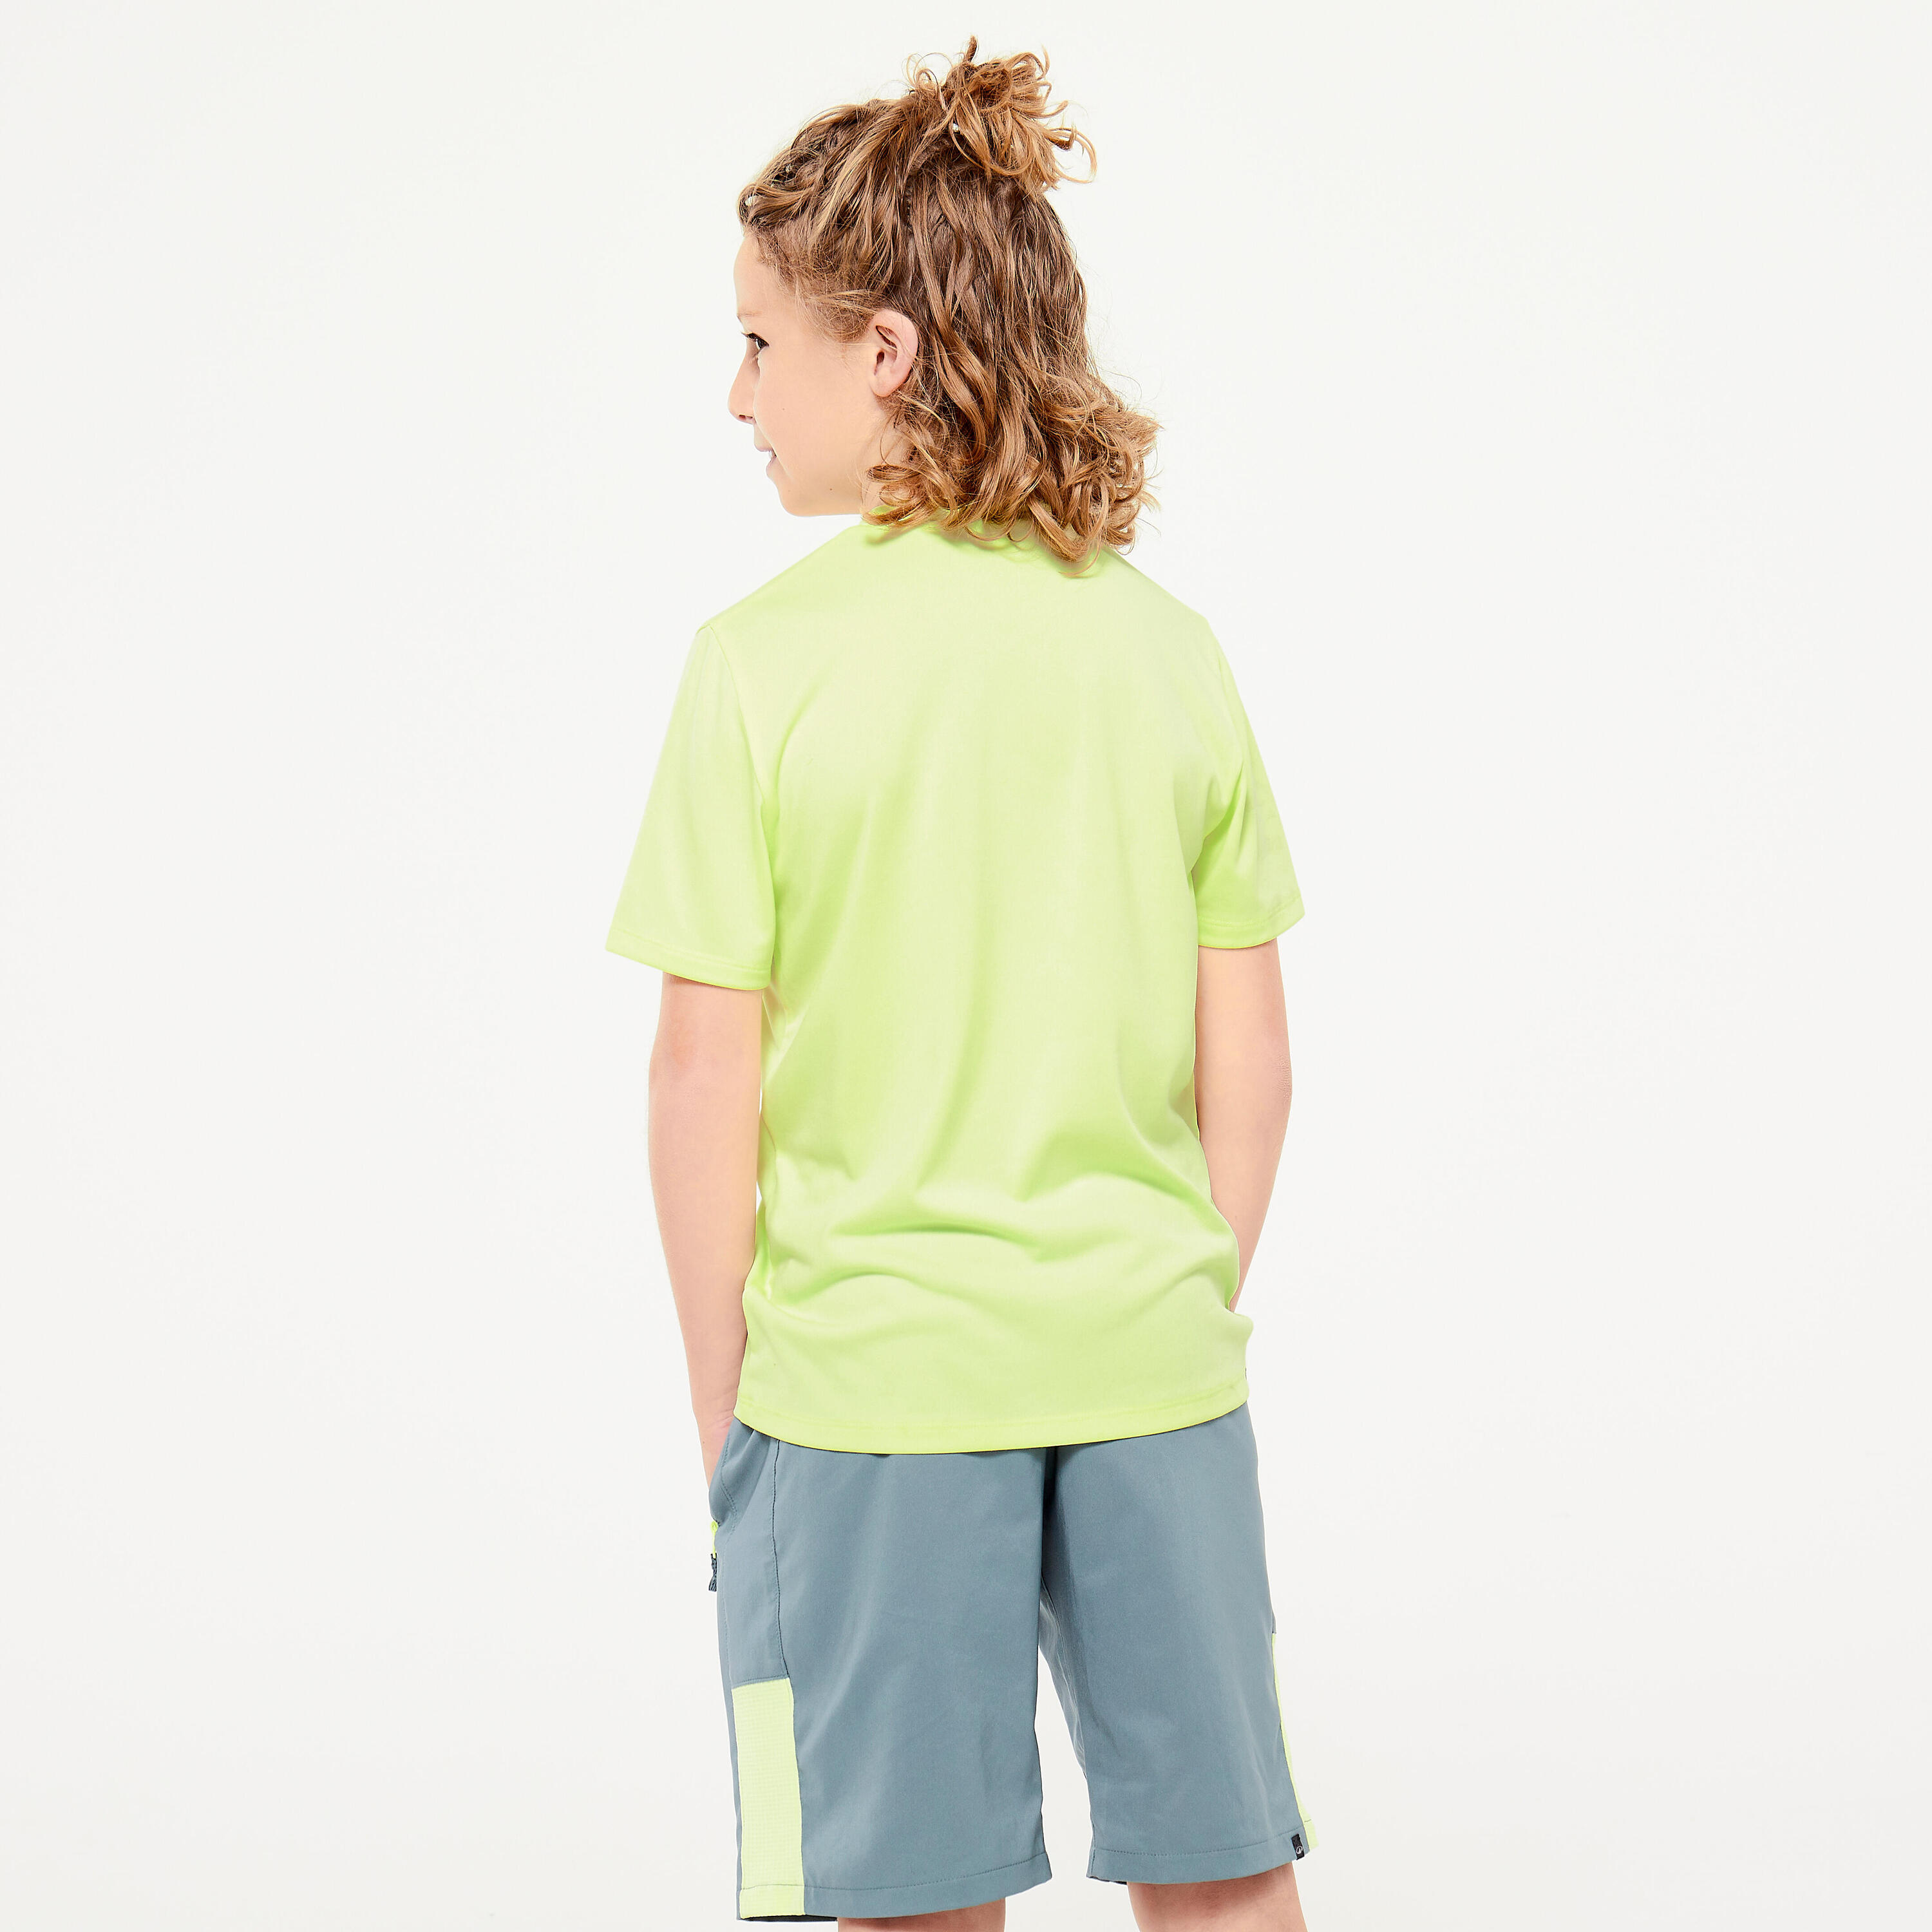 Kids' Breathable T-Shirt - Yellow 4/4